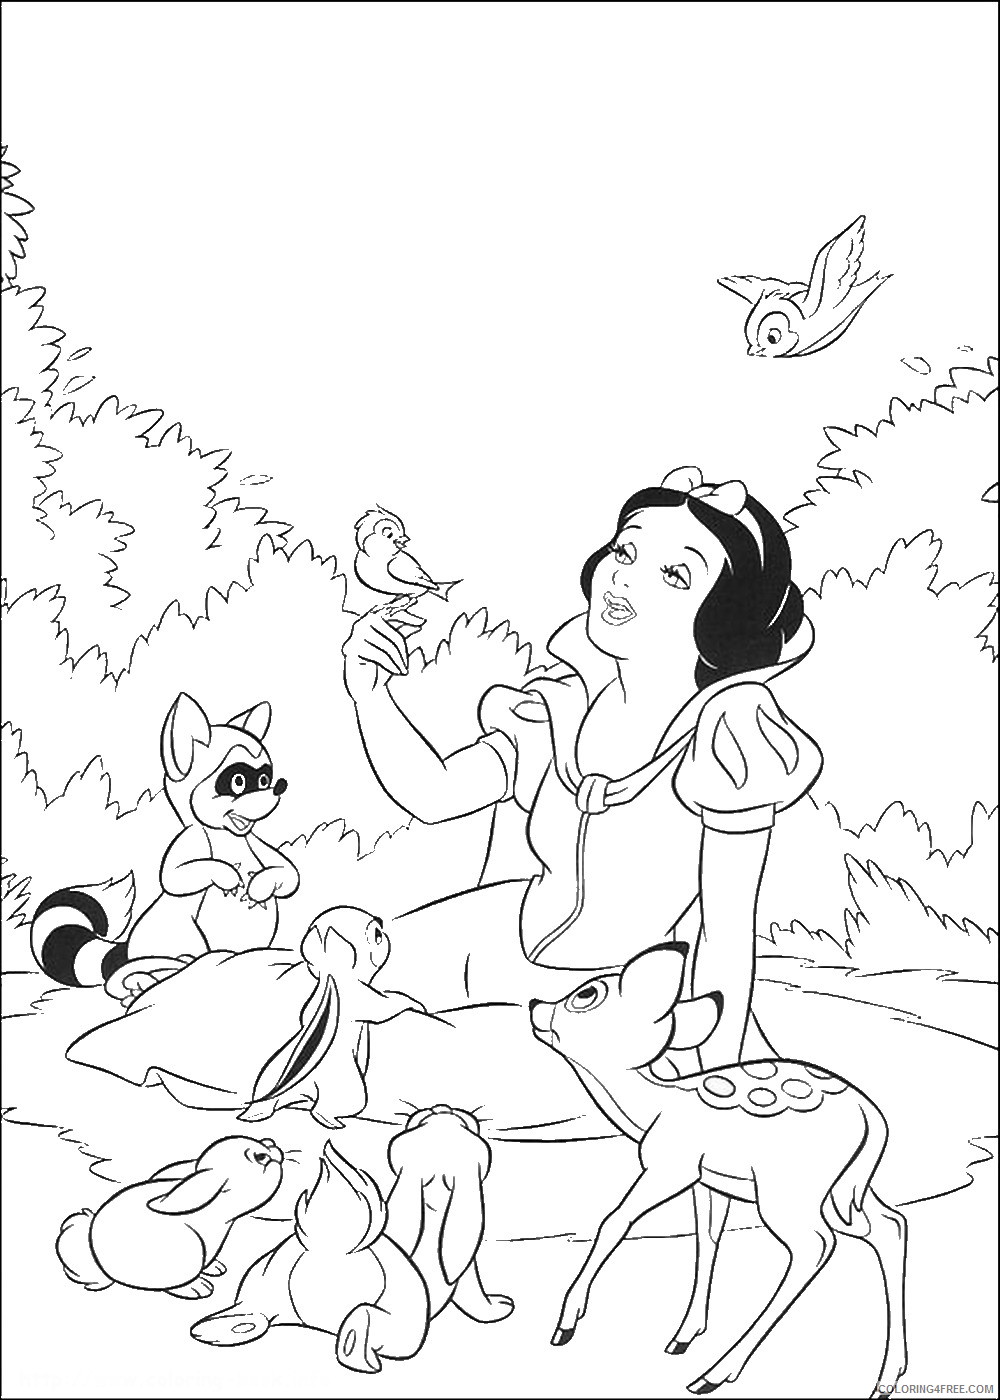 Snow White Coloring Pages Cartoons snow_white_cl_68 Printable 2020 5743 Coloring4free